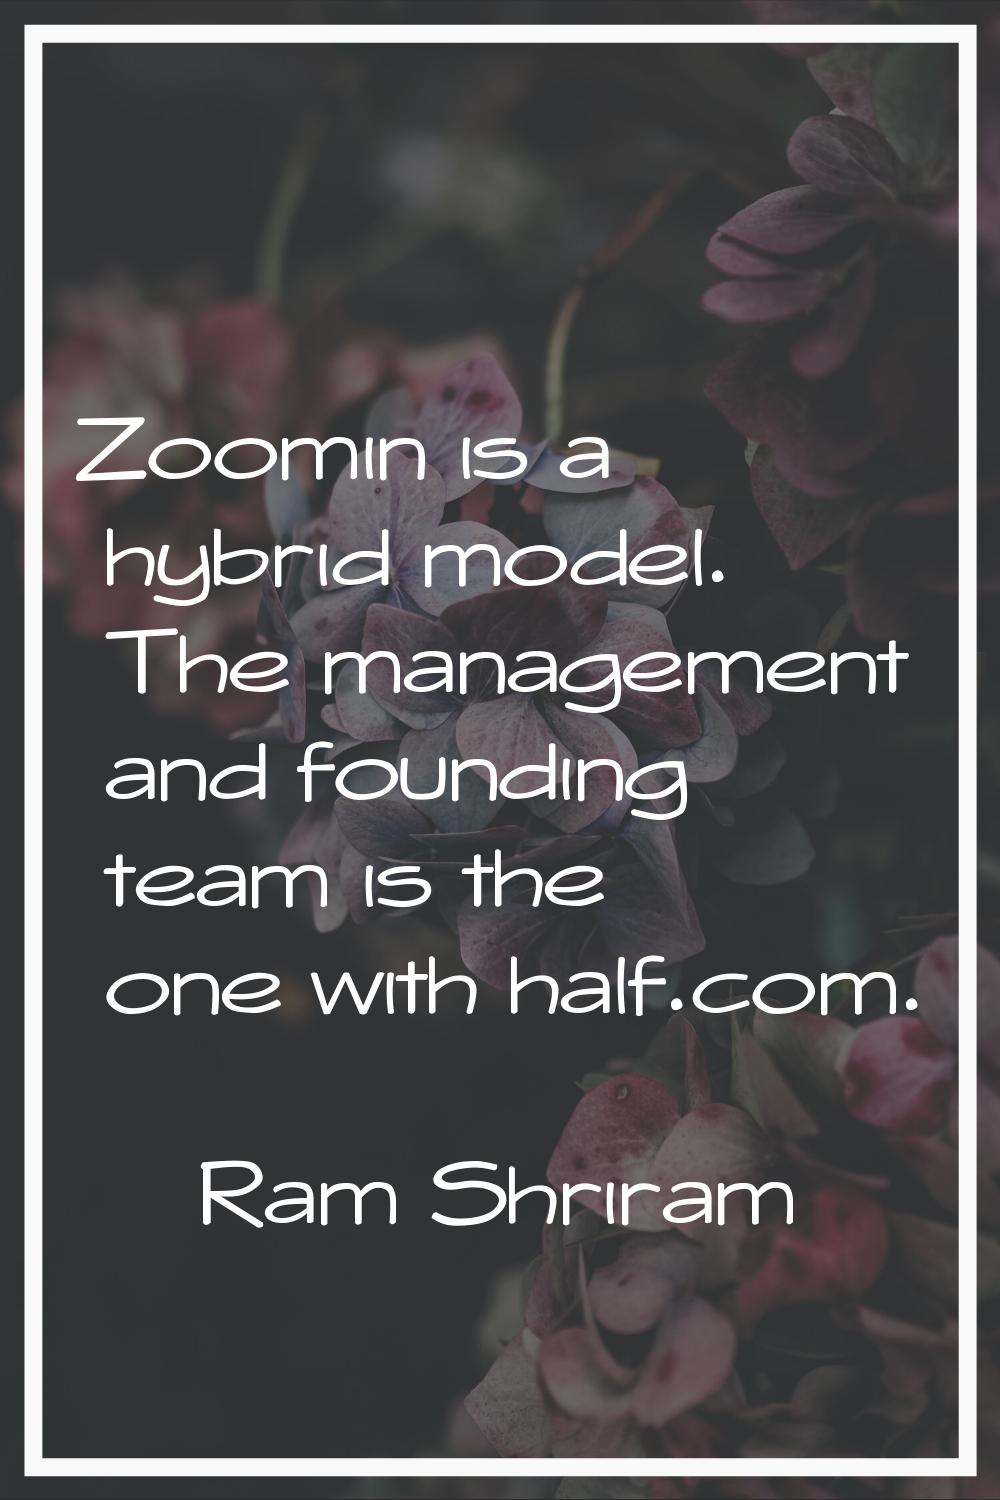 Zoomin is a hybrid model. The management and founding team is the one with half.com.